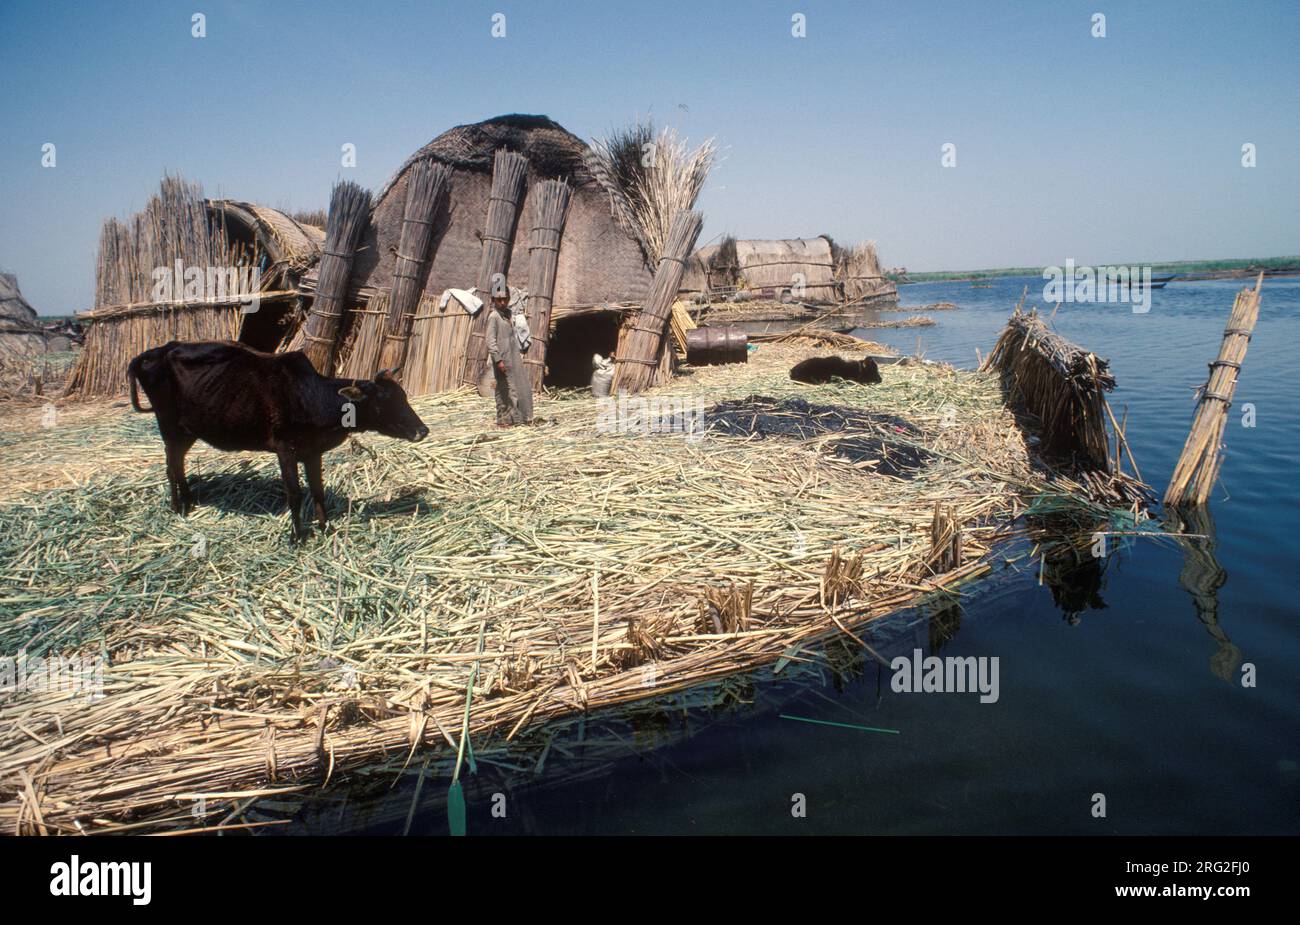 Marsh Arabs Iraq. Reed island houses, cattle eating freshly cut reeds, a young boys keeps an eye on them. Islands are known as dibin. Rivers Tigris and Euphrates wetlands, Hammar marshes. Southern Iraq 1980s 1984 HOMER SYKES Stock Photo